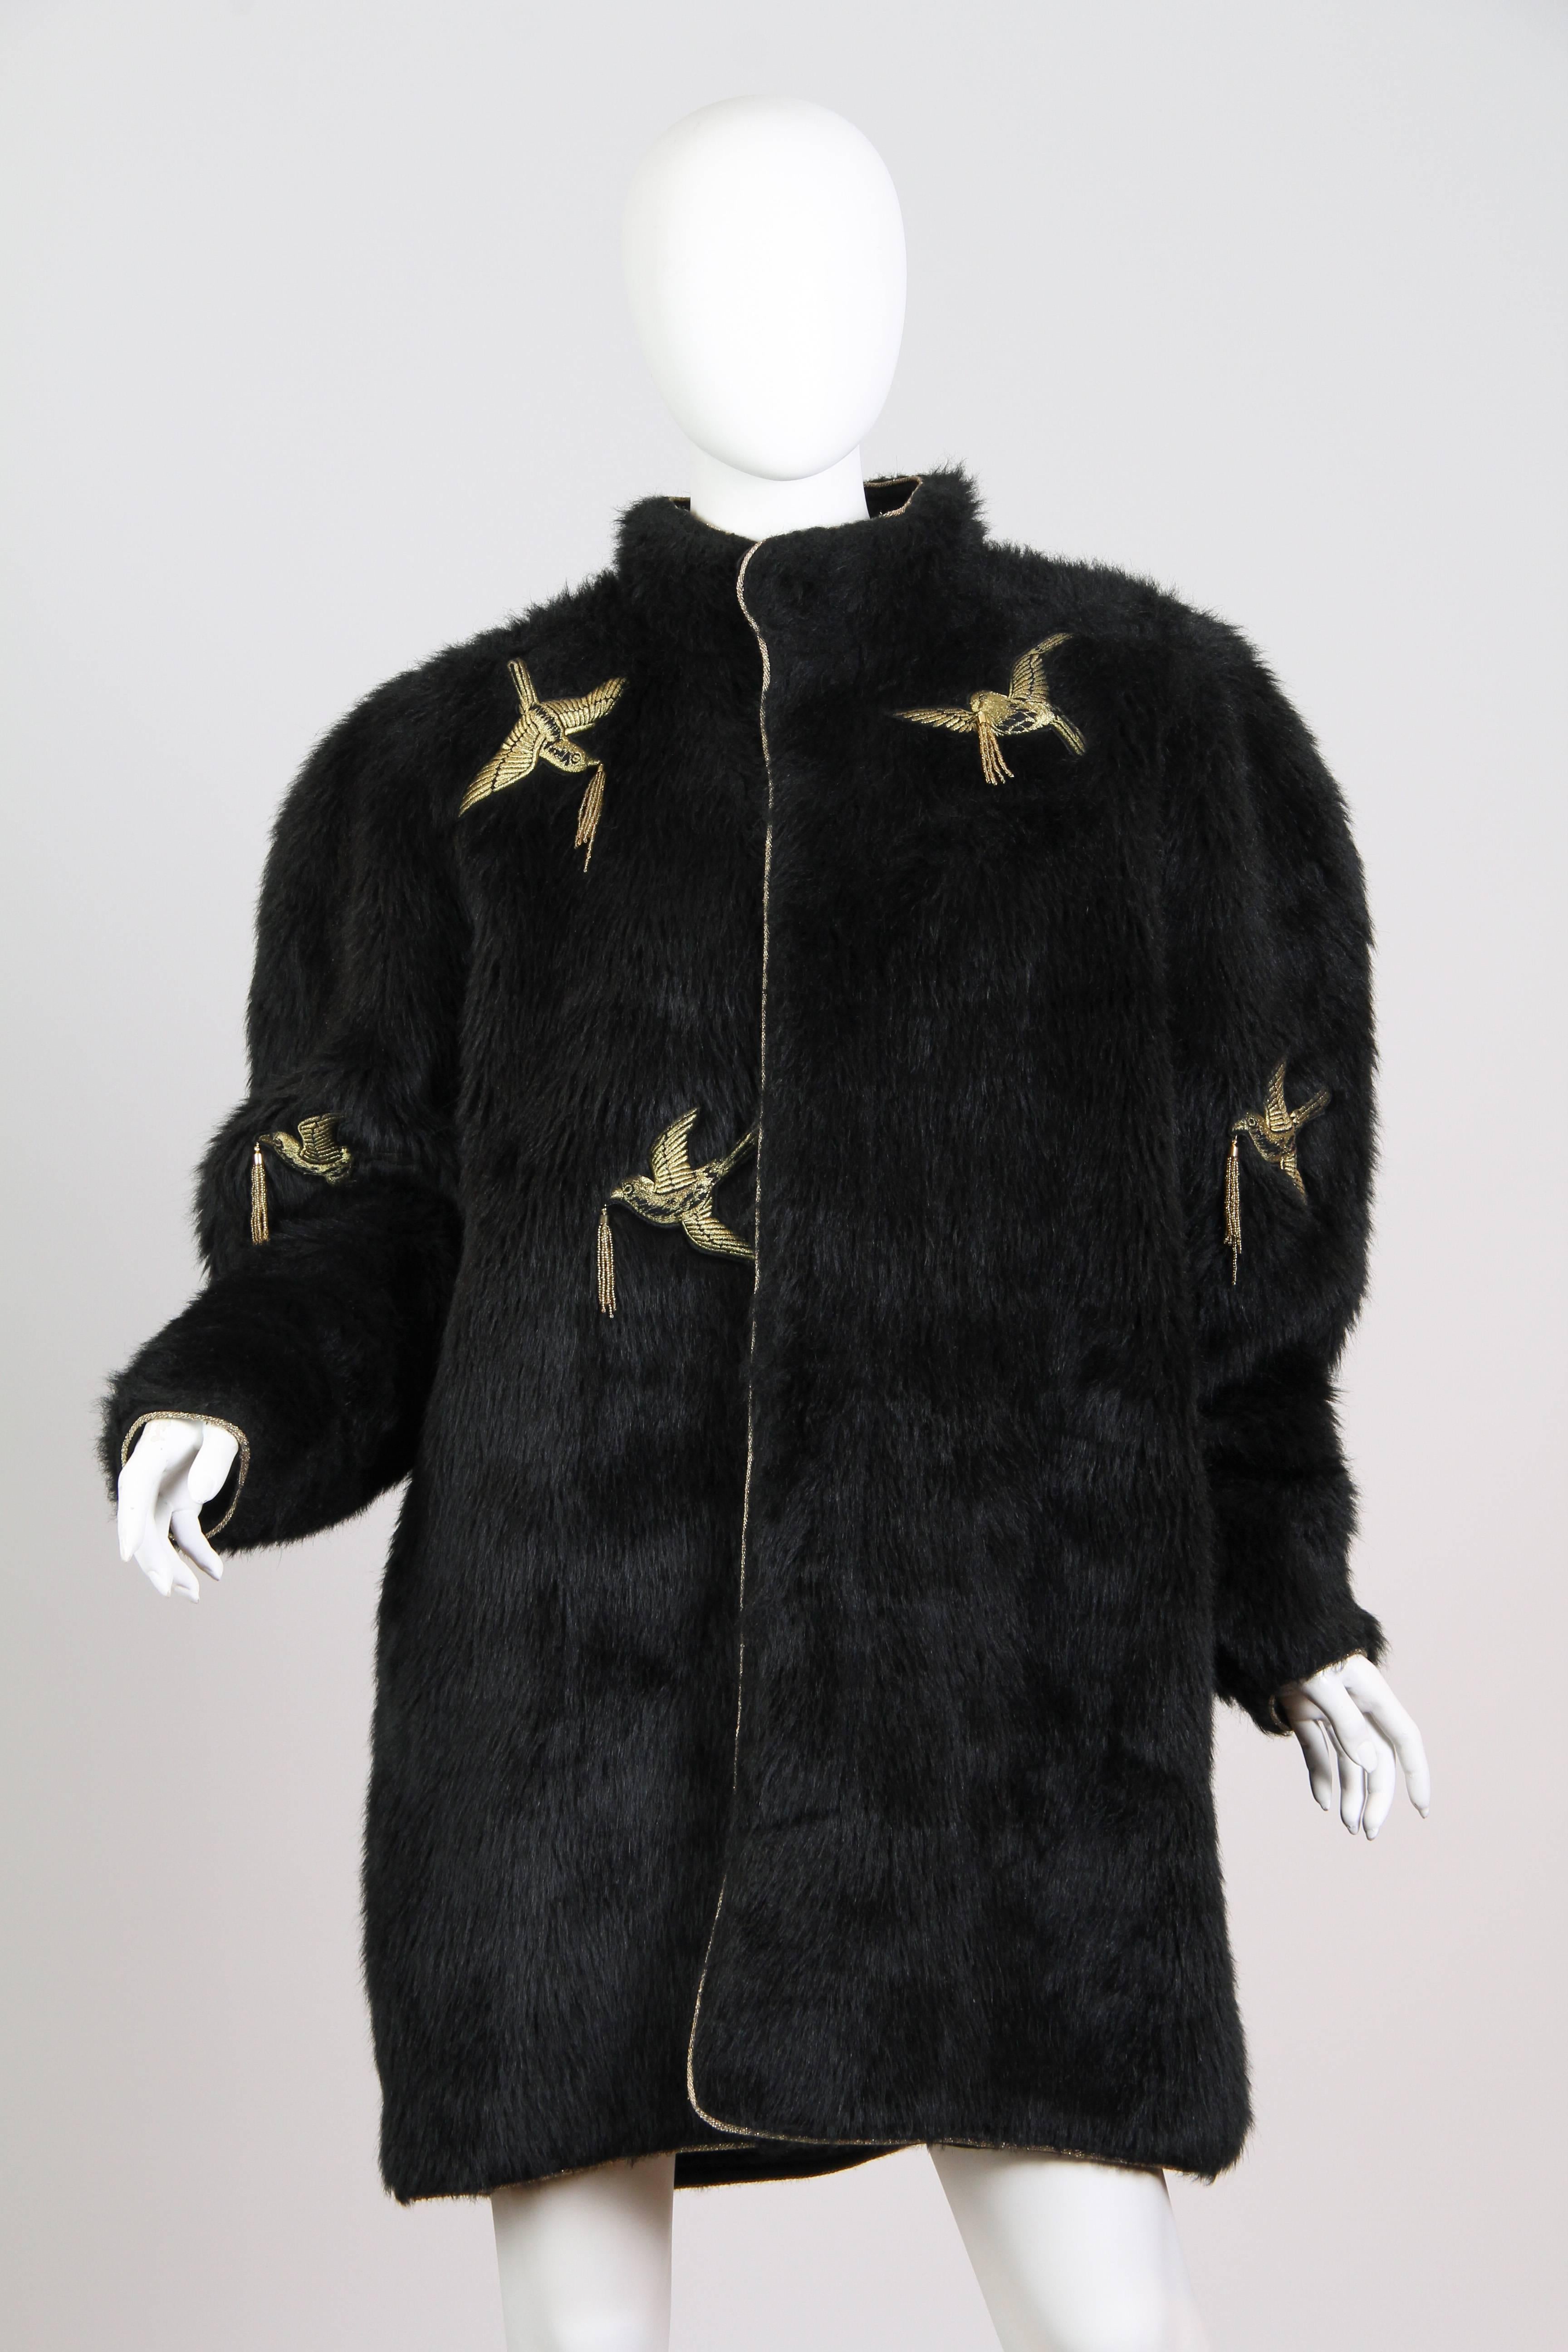 This is an incredible coat by Japanese designer Yamamoto Kansai. The base of the coat is a deep black pile, within which gold songbirds have been embroidered. Each swooping bird carries a gold beaded tassel in its beak. All the edges of the coat are